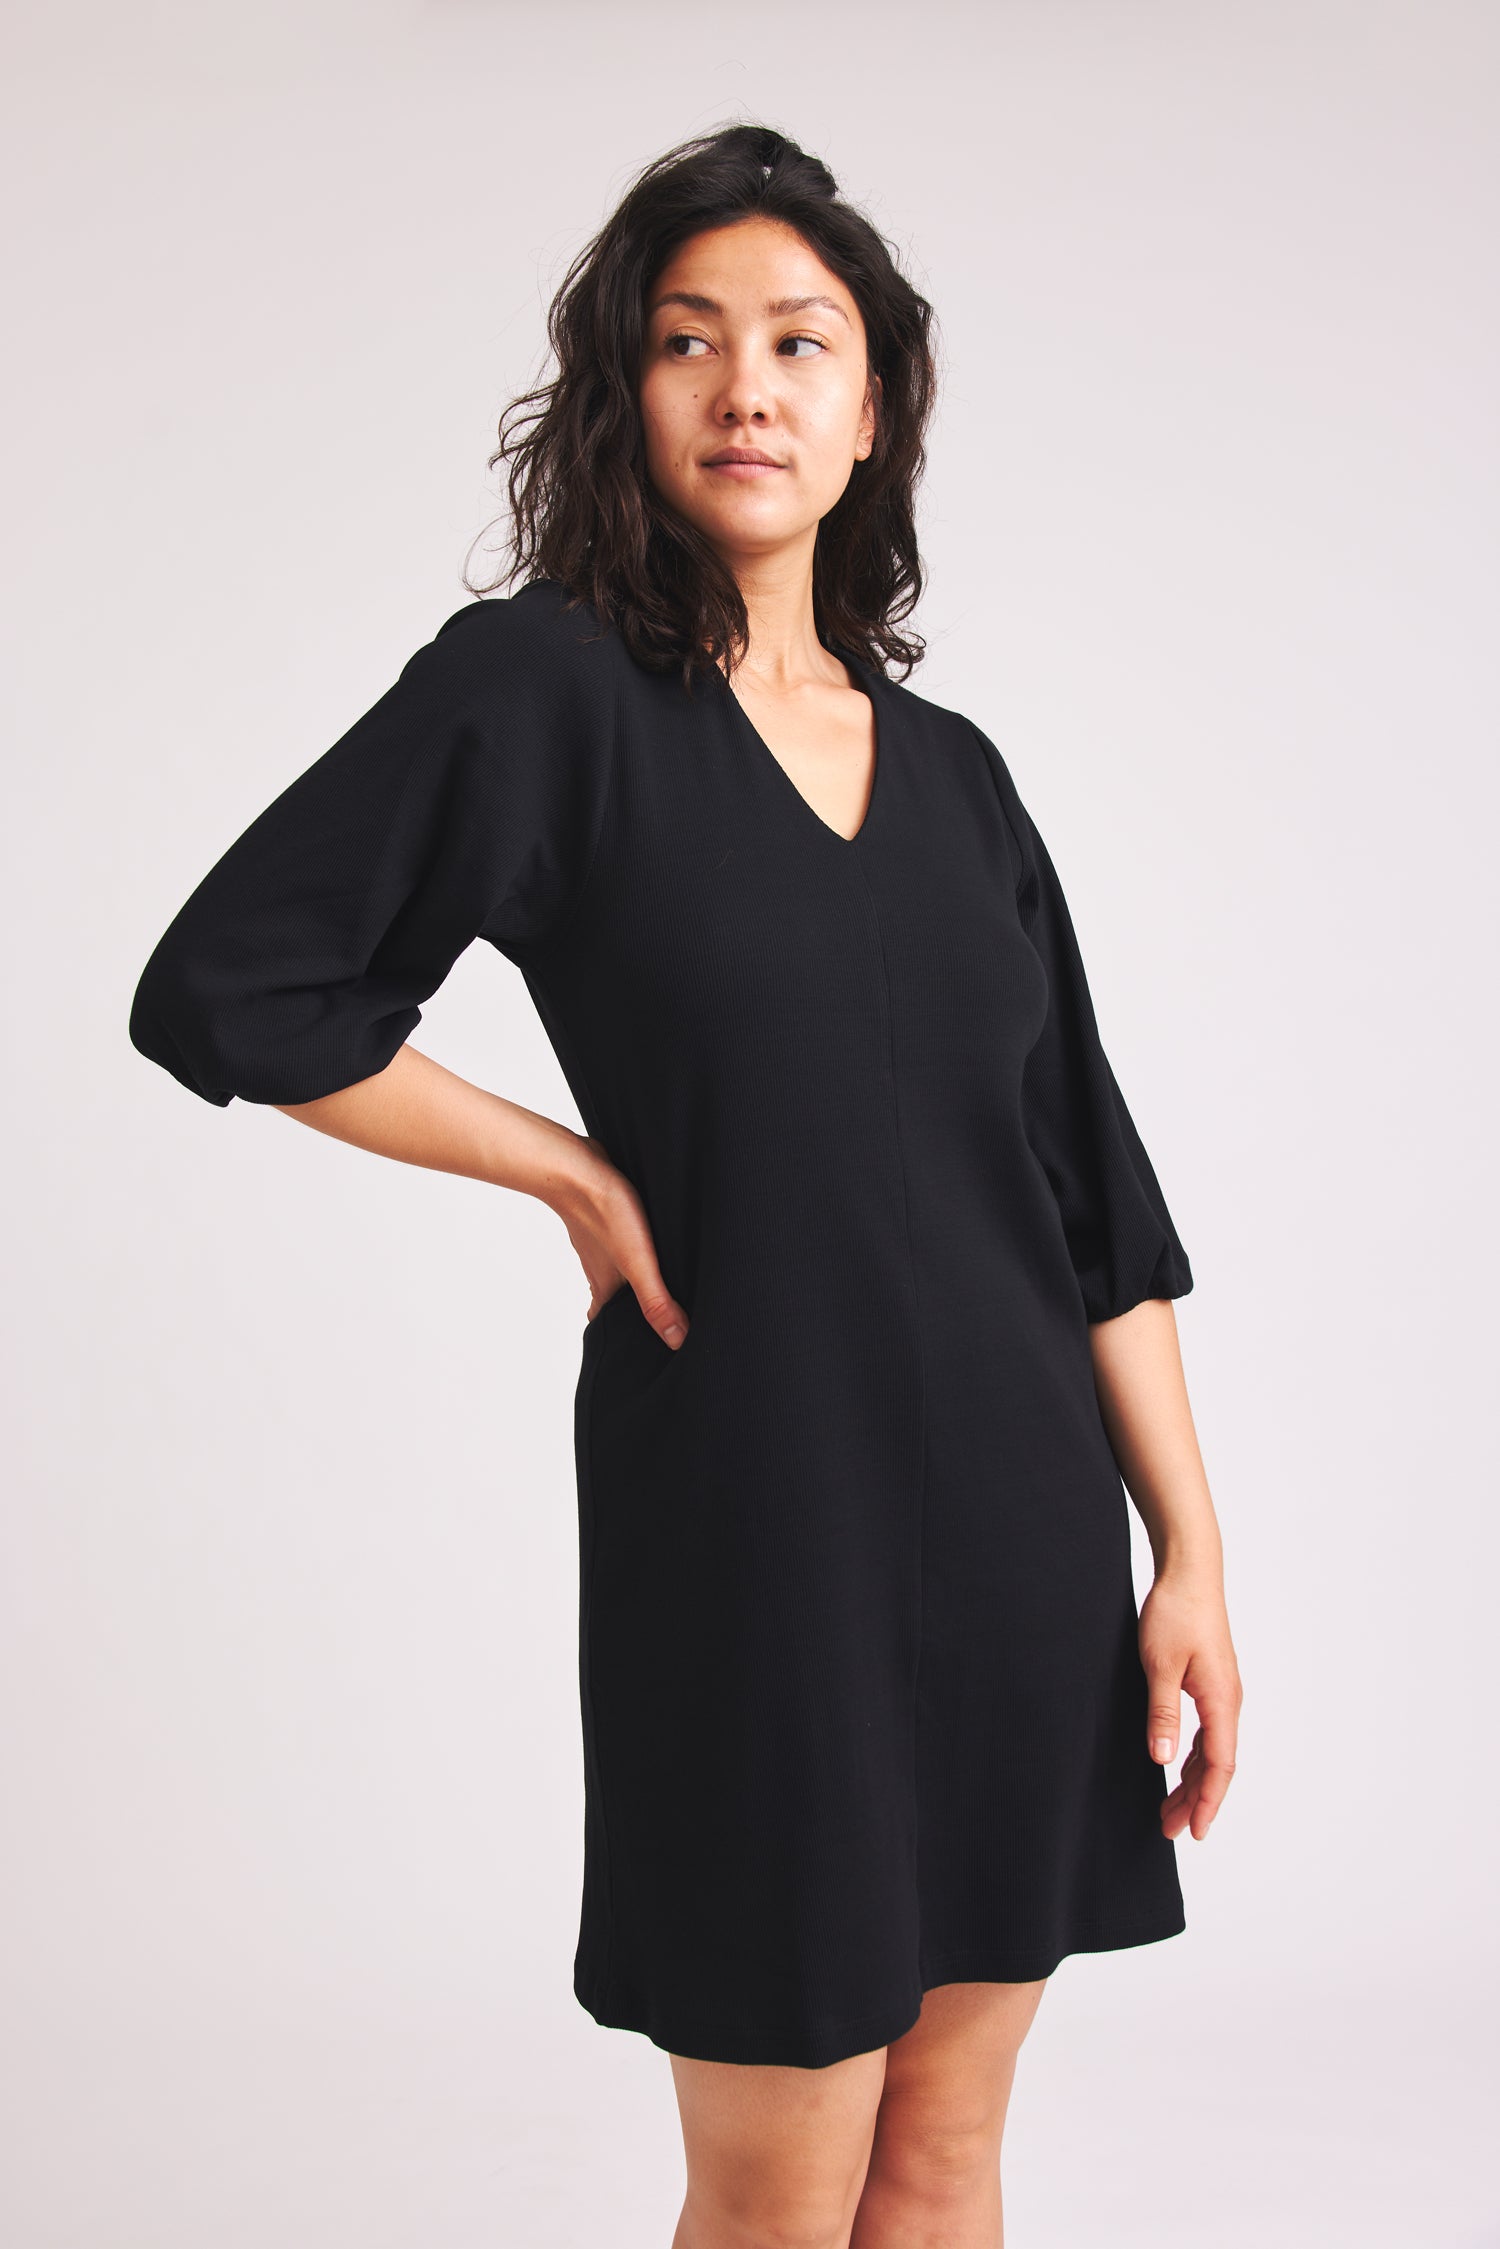 Black organic cotton Bruni dress from Baige the Label